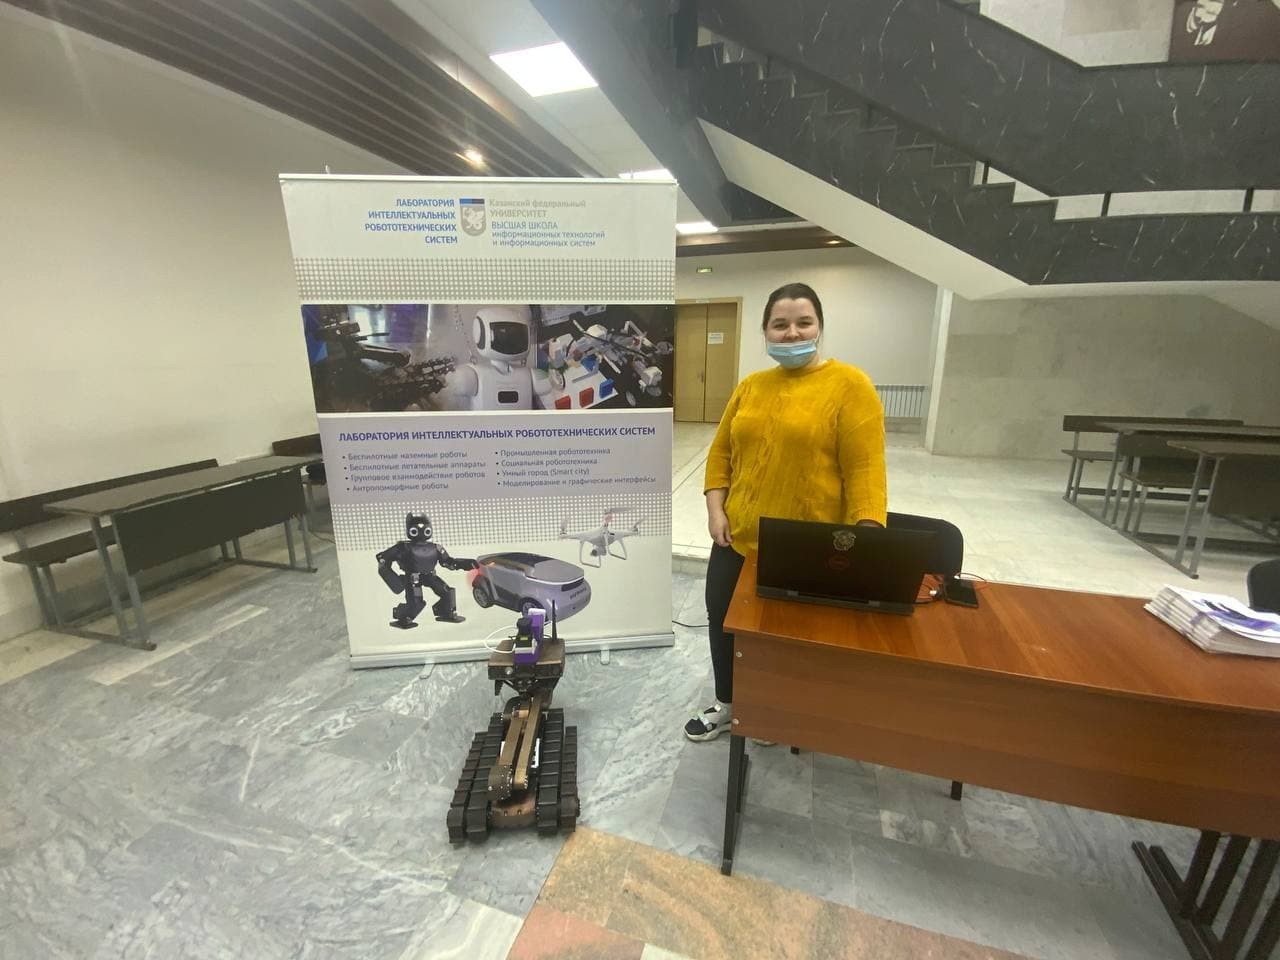 Laboratory of intelligent robotic systems participated in the exhibition dedicated to the VI All-Russian Scientific Conference of Students named after N. Lobachevsky